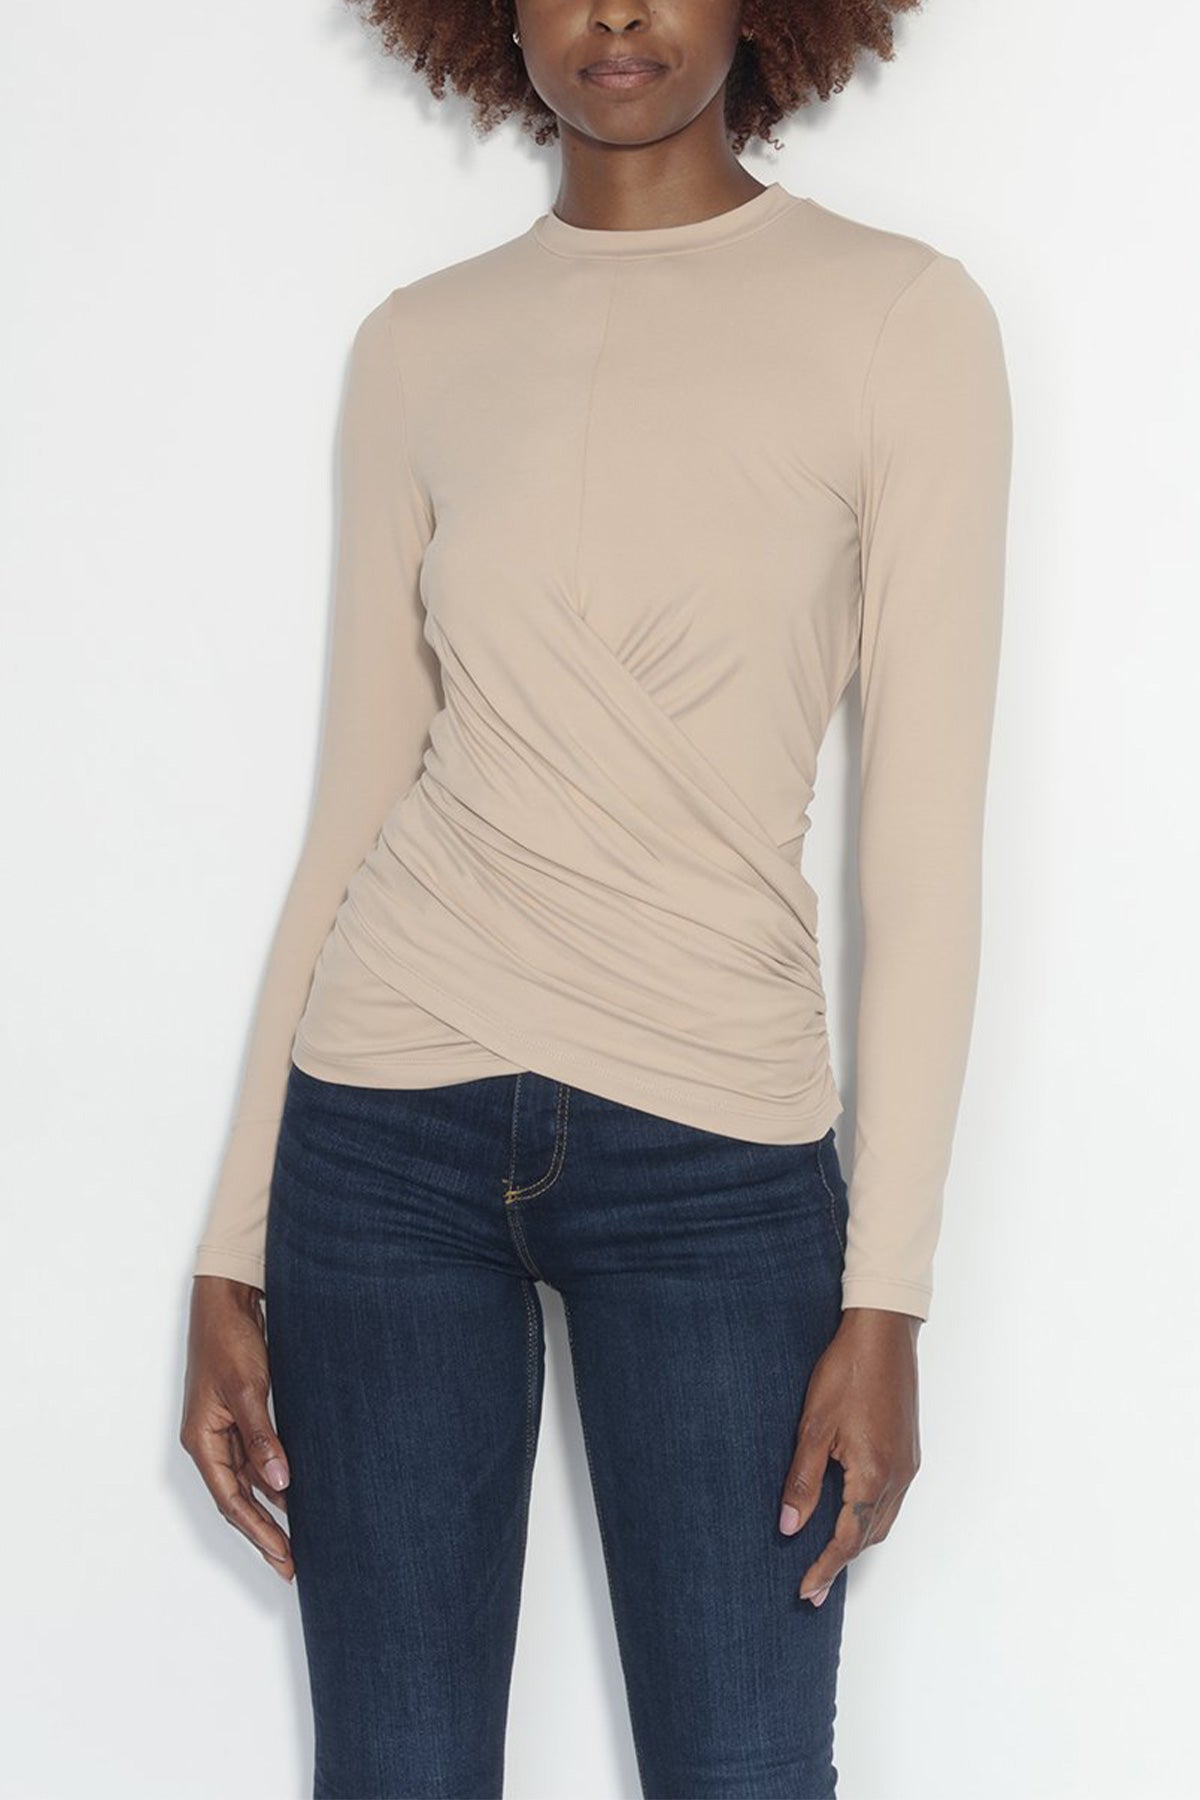 Cross Front Crew Neck Long Sleeve in Parchment - shop-olivia.com